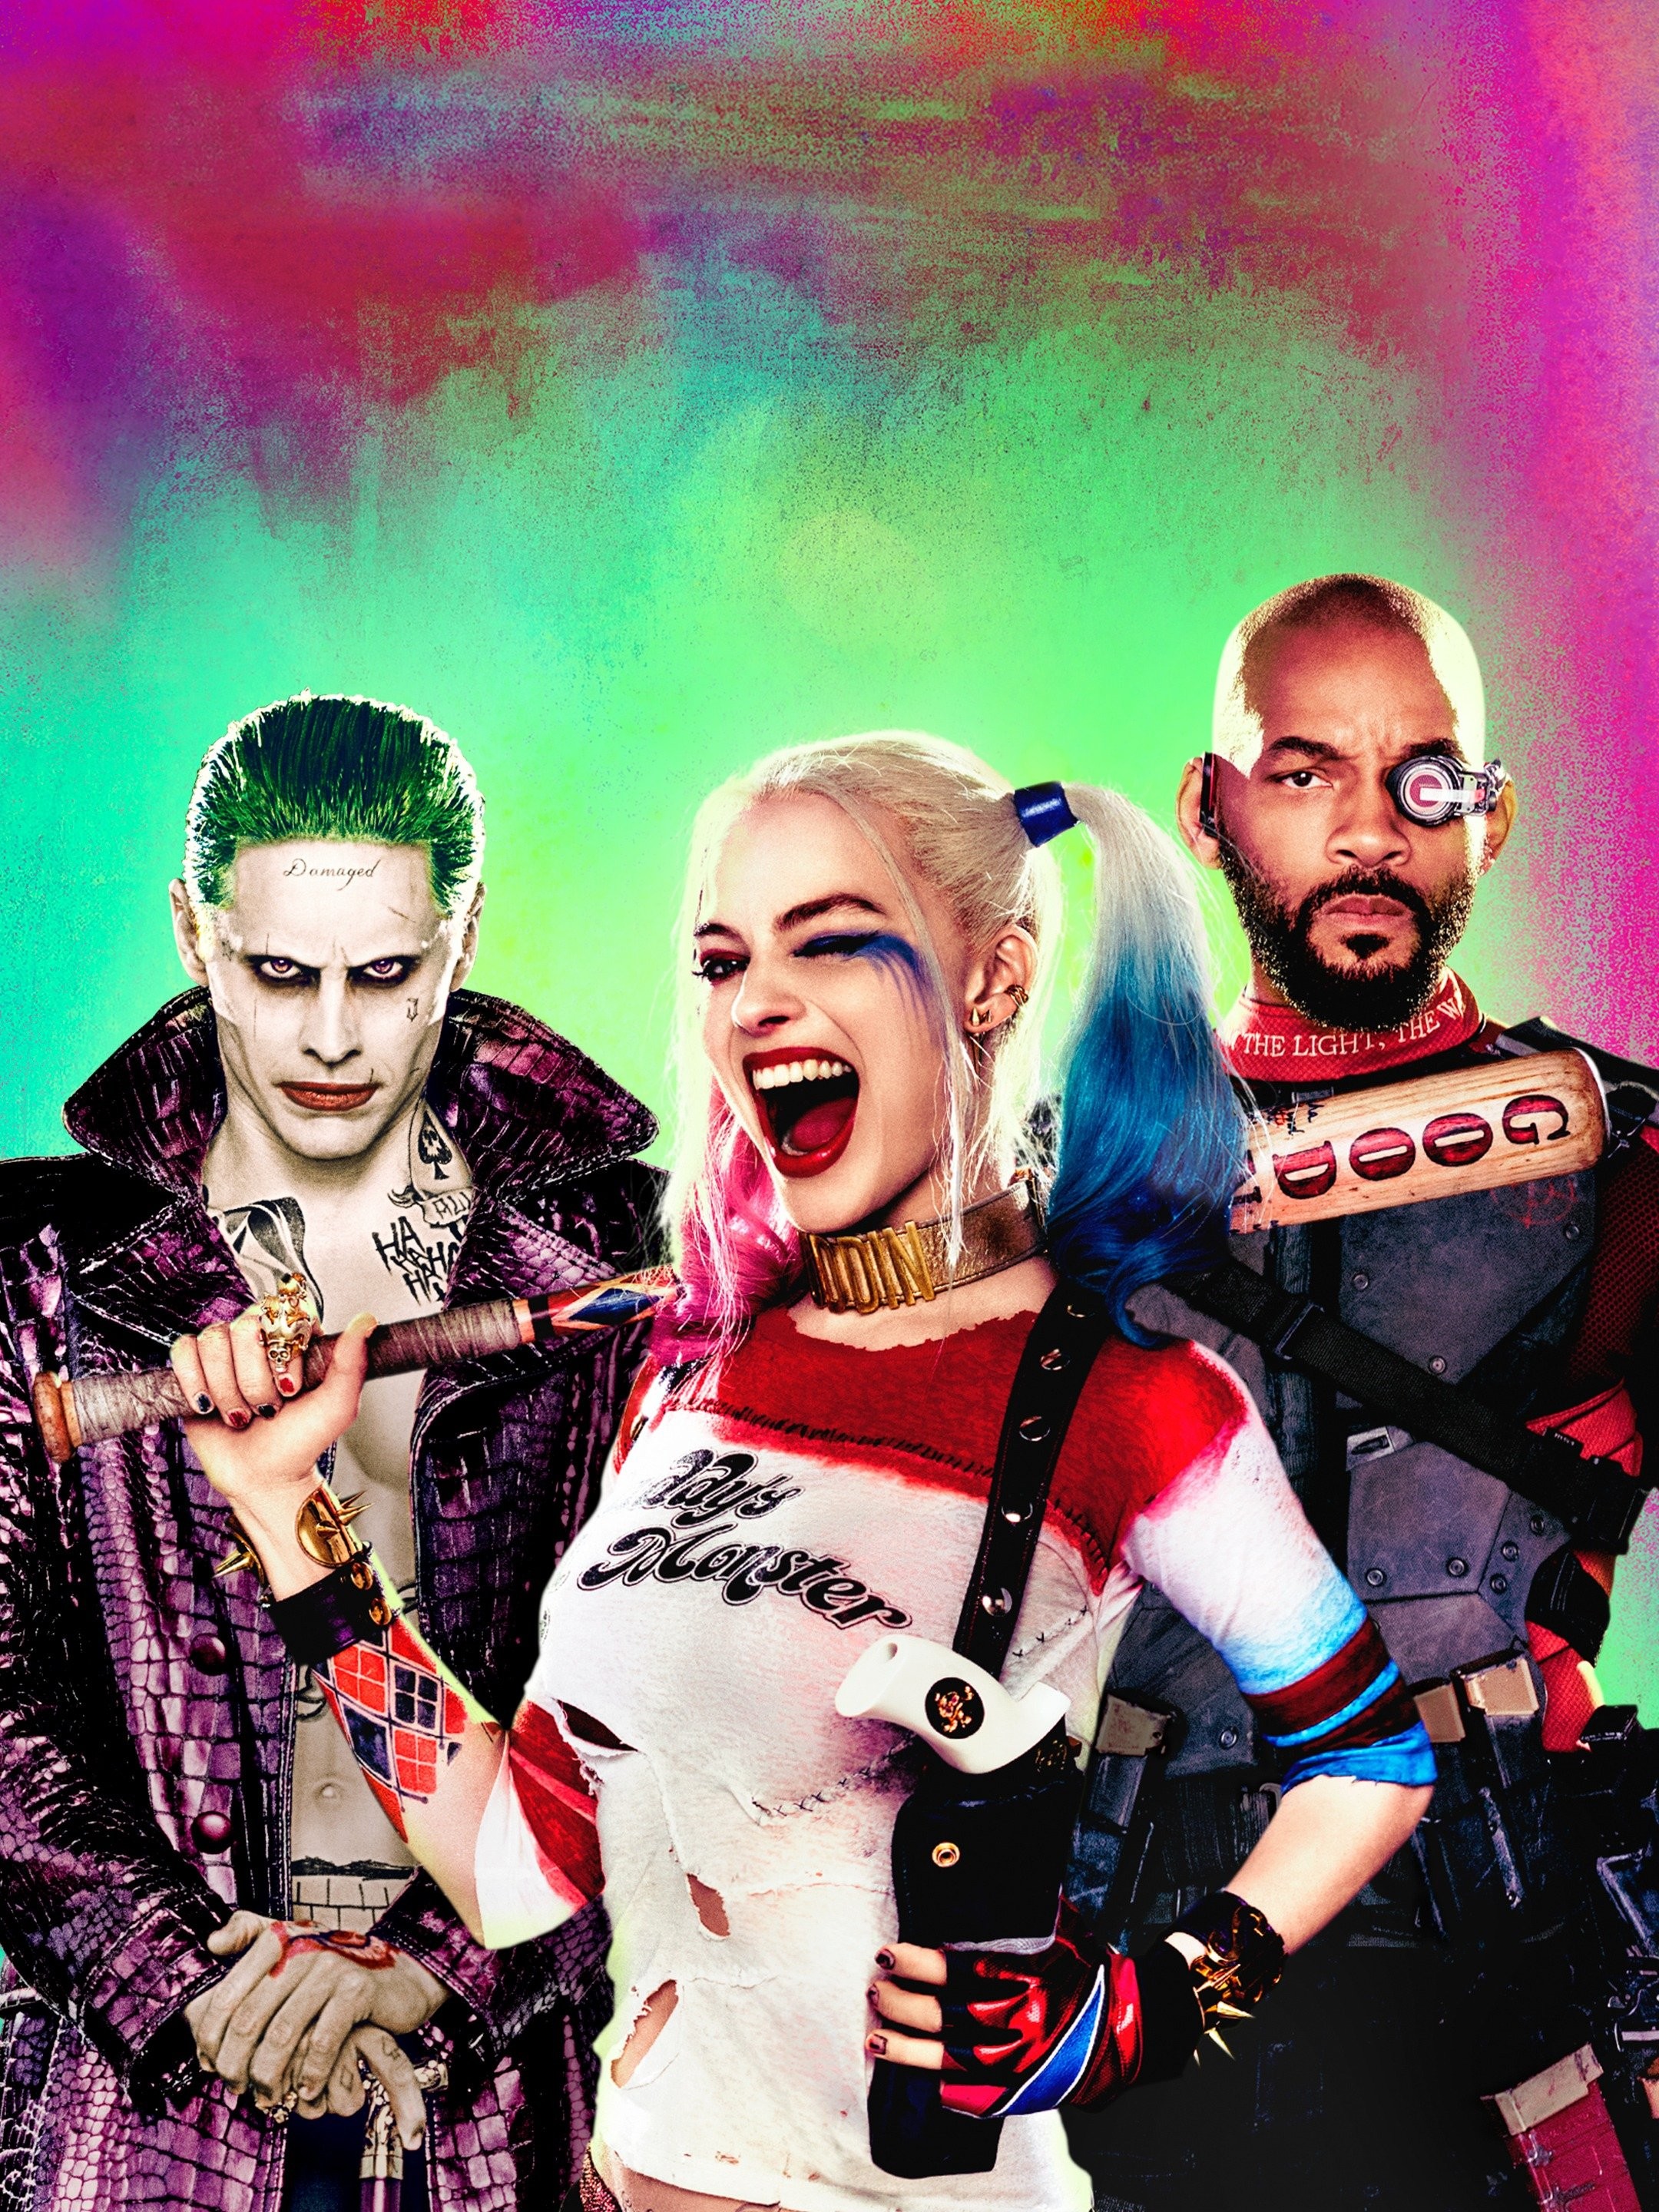 The Suicide Squad - Rotten Tomatoes